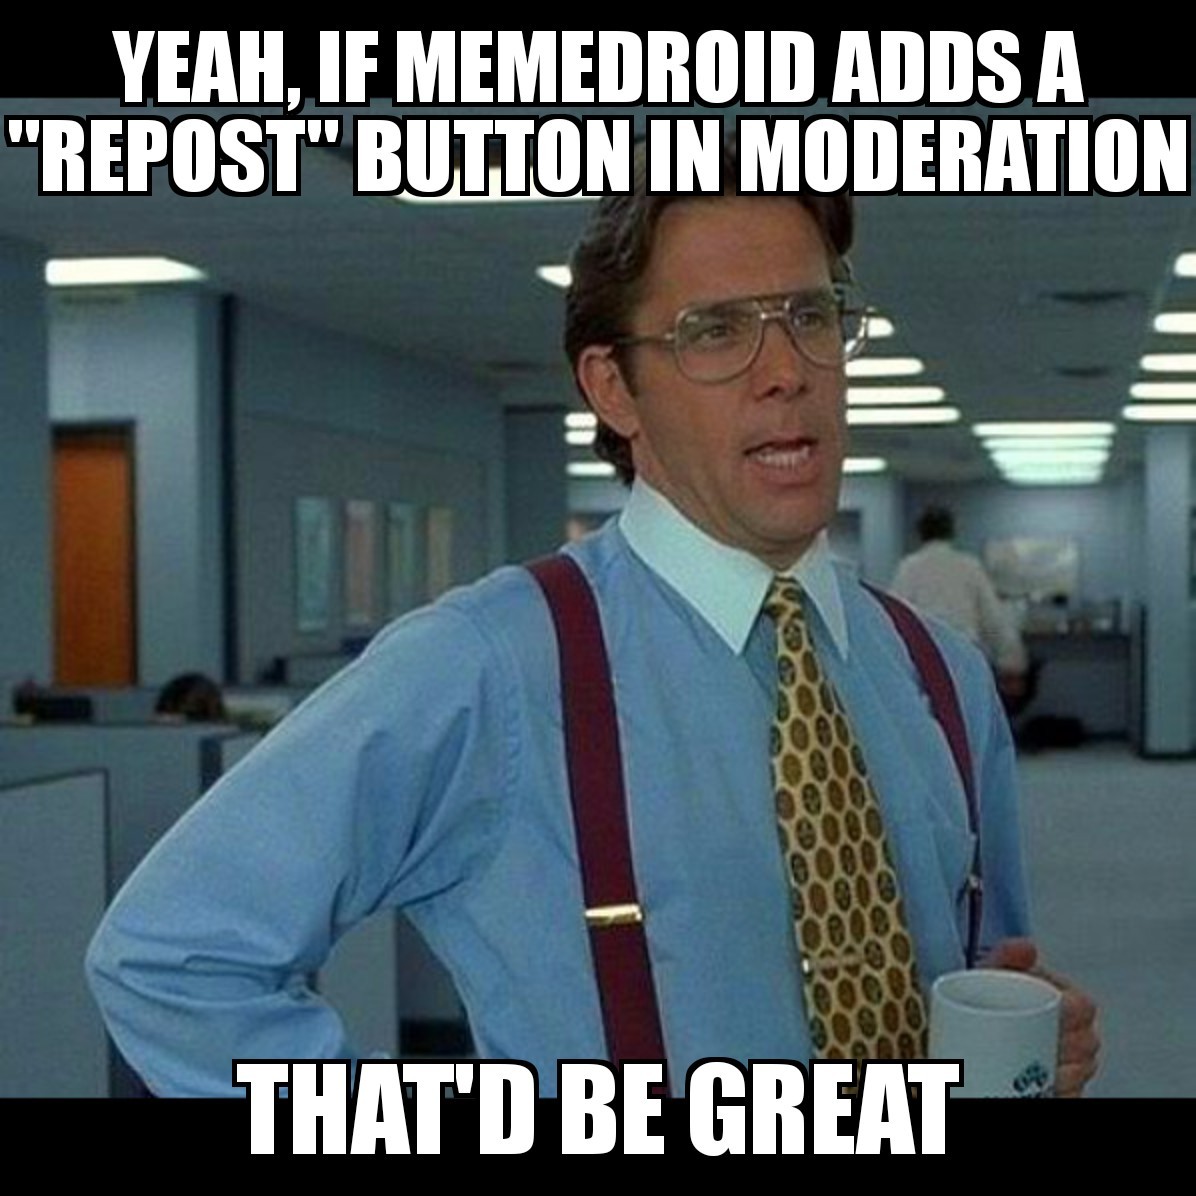 For quicker moderation - meme